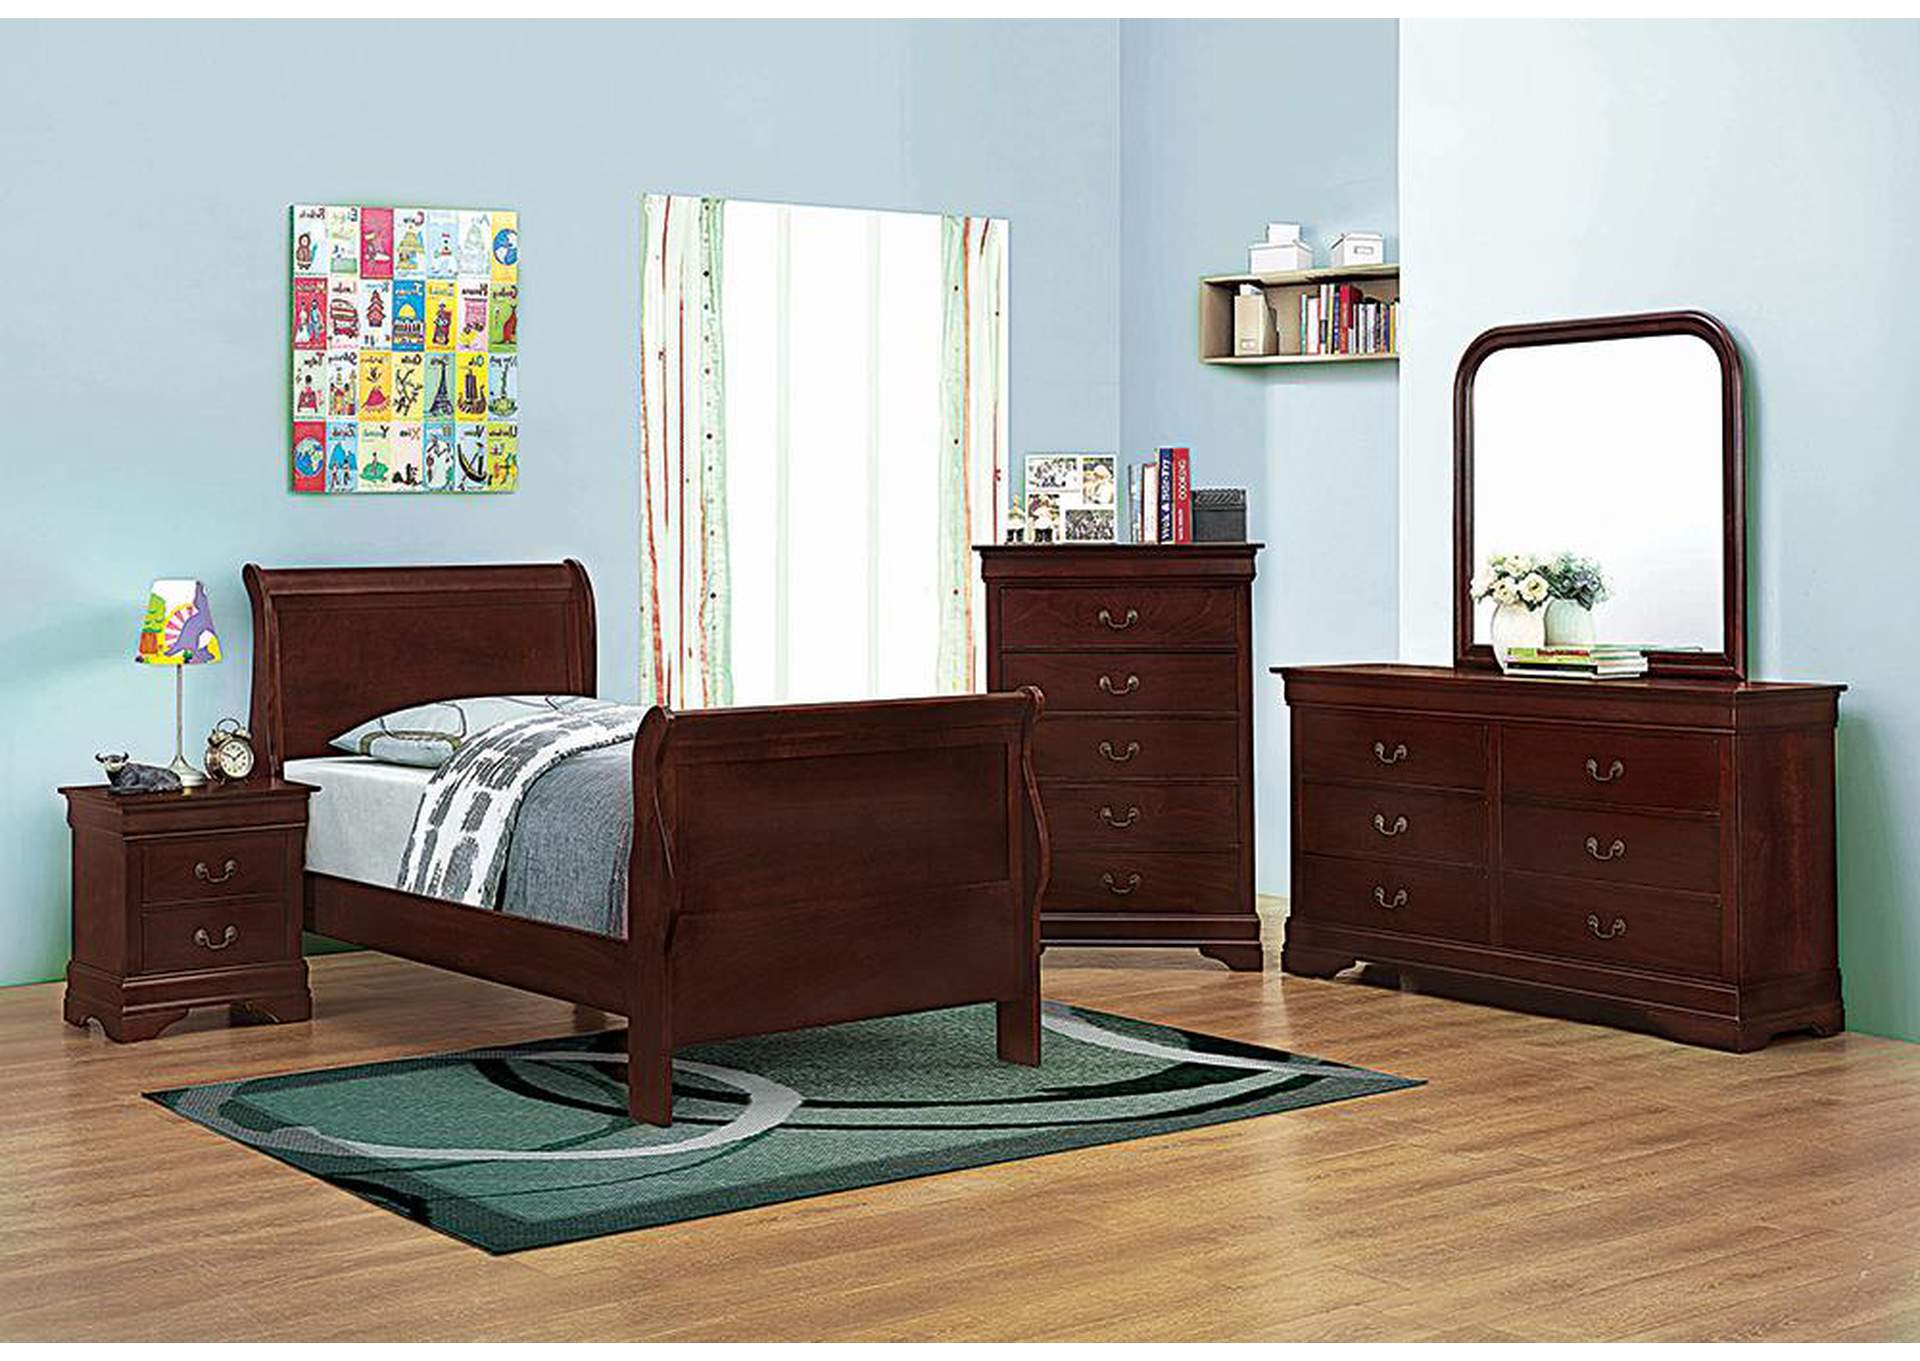 Cherry Full Bed,ABF Coaster Furniture